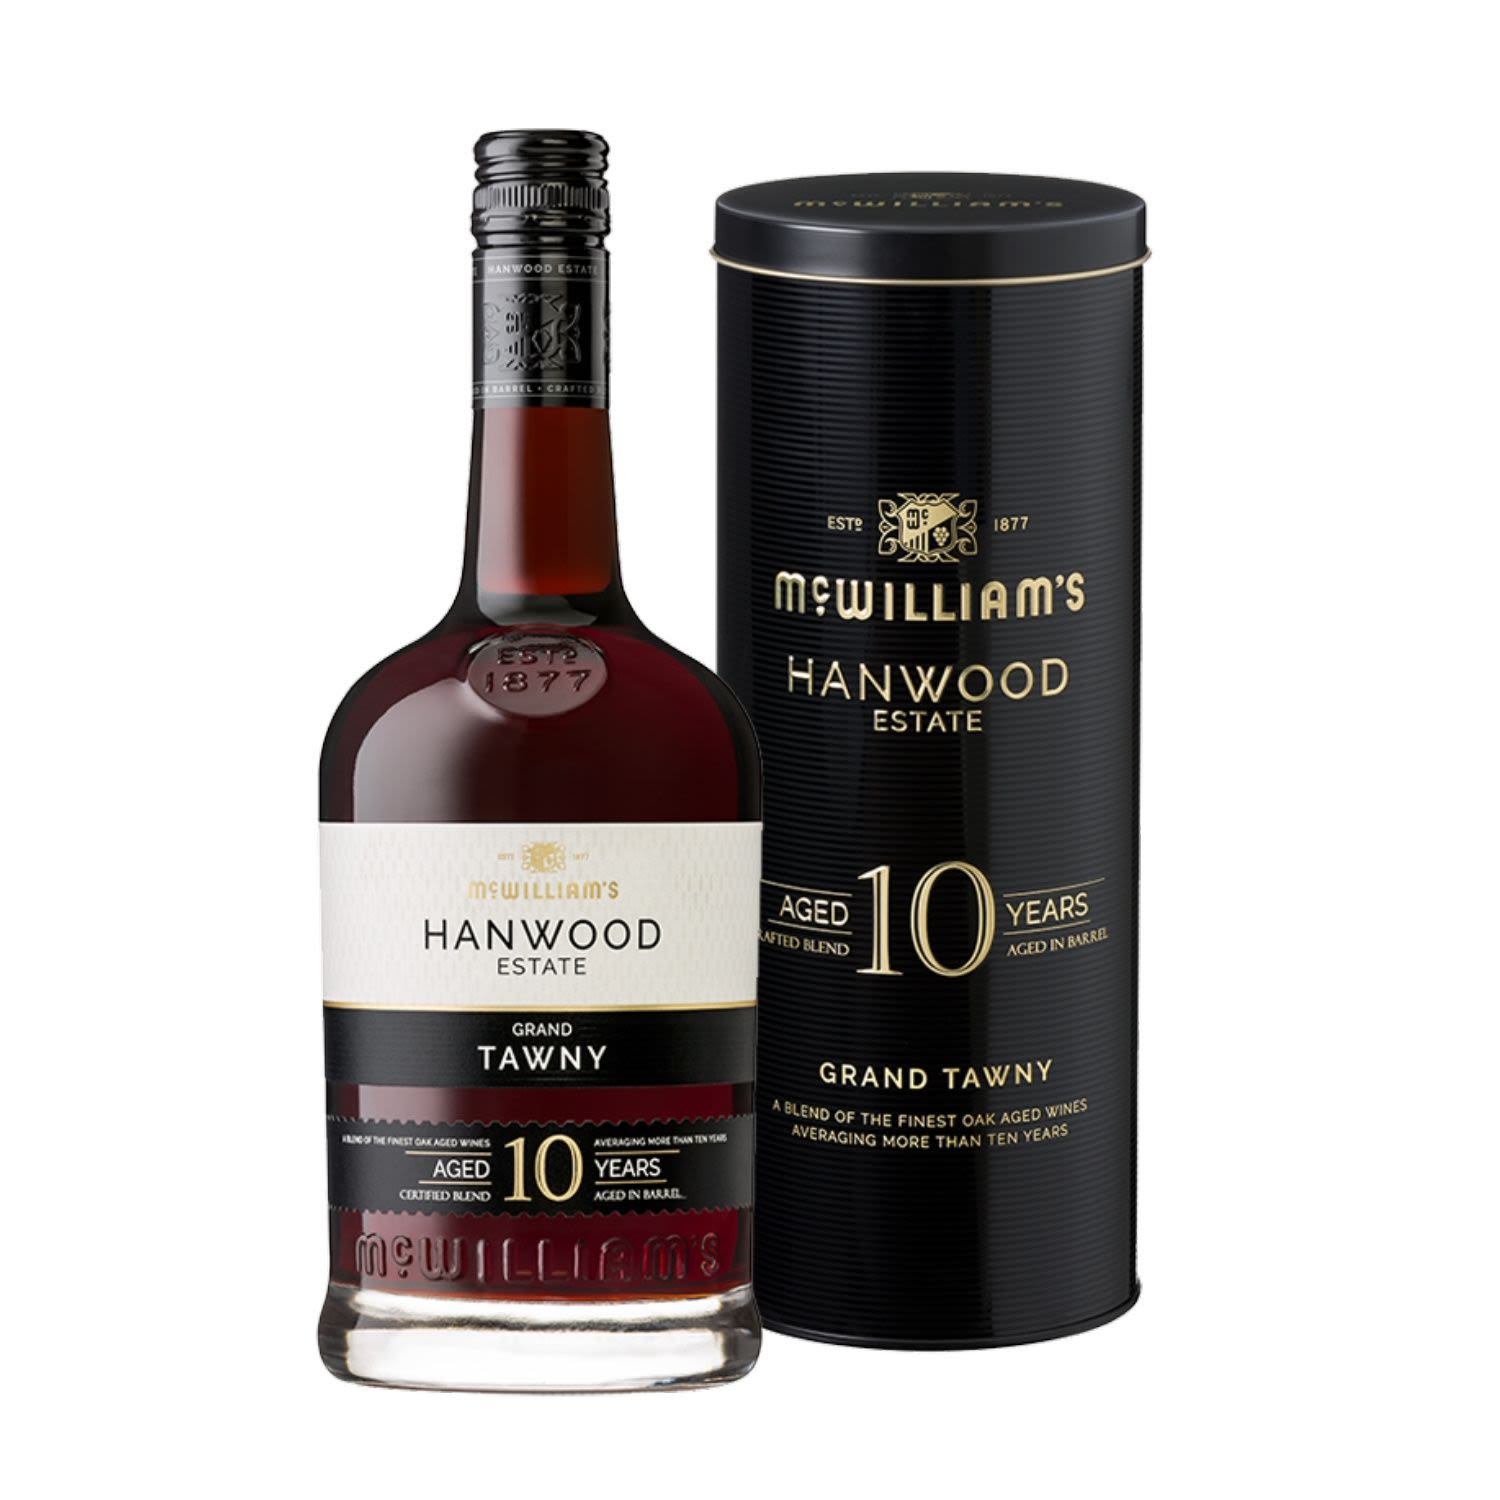 This Tawny shows how good Australians are at making affordable fortified wine. With dried fruit flavours and dusty all-spice, its an after dinner treat.<br /> <br />Alcohol Volume: 18.50%<br /><br />Pack Format: Bottle<br /><br />Standard Drinks: 10.9</br /><br />Pack Type: Bottle<br /><br />Country of Origin: Australia<br /><br />Region: Riverina<br /><br />Vintage: NV<br />